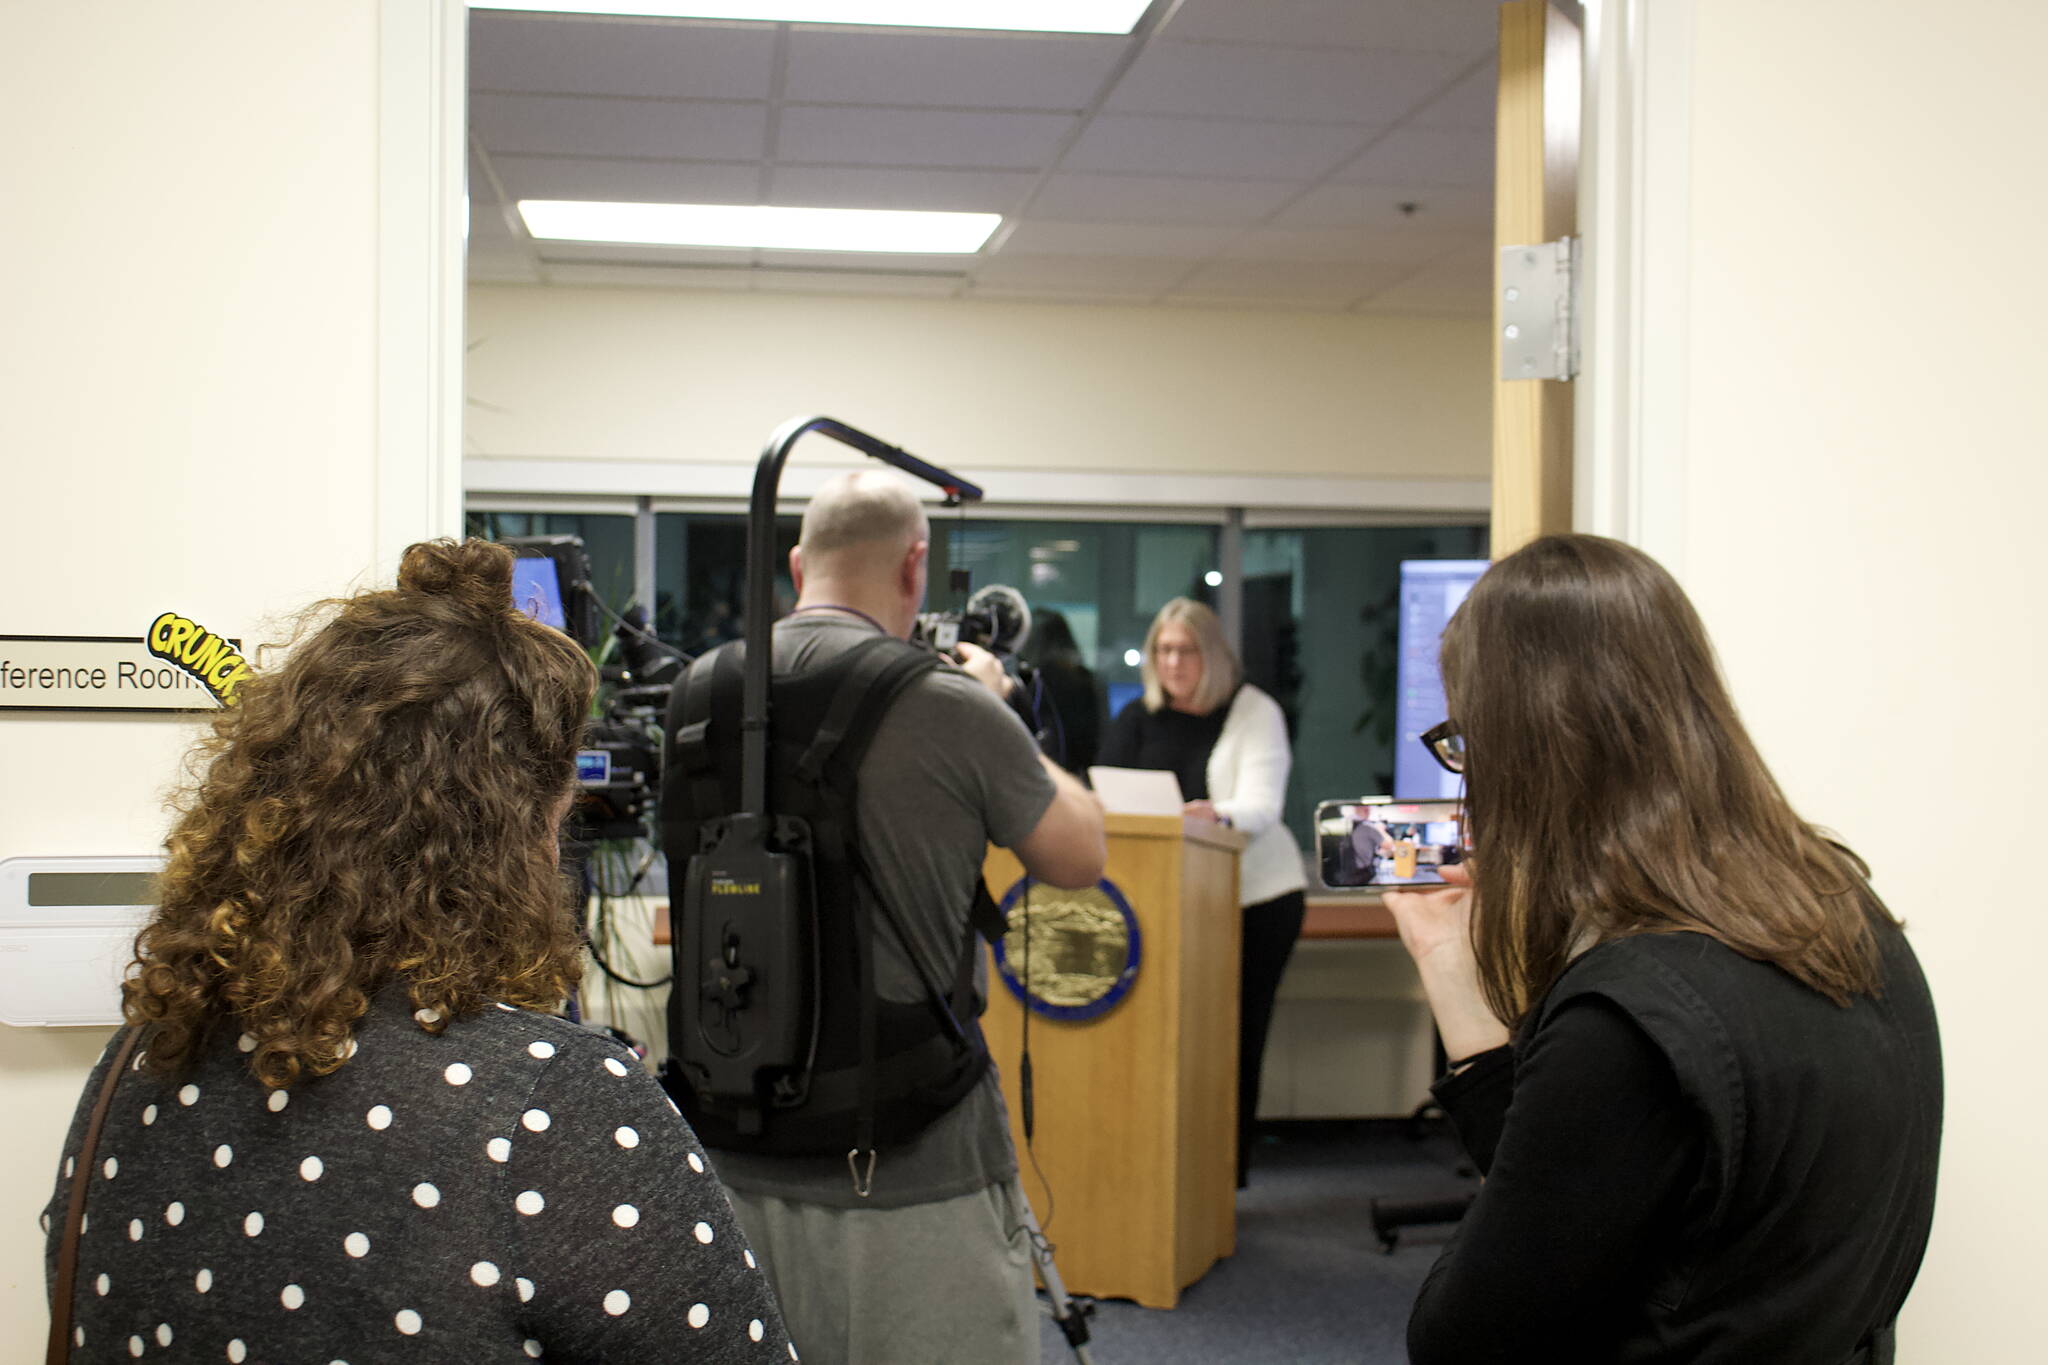 A few members of the media and observers watch the ranked choice tally being filmed by public broadcaster KTOO in the Alaska Division of Elections director’s office in Juneau on Wednesday afternoon. While the state’s first ranked choice general election got widespread national attention, including from skeptics questioning the integrity of the process, no such doubters were at the count and elections officials said harassment by observers experienced by employees in other states has not occurred here. (Mark Sabbatini / Juneau Empire)